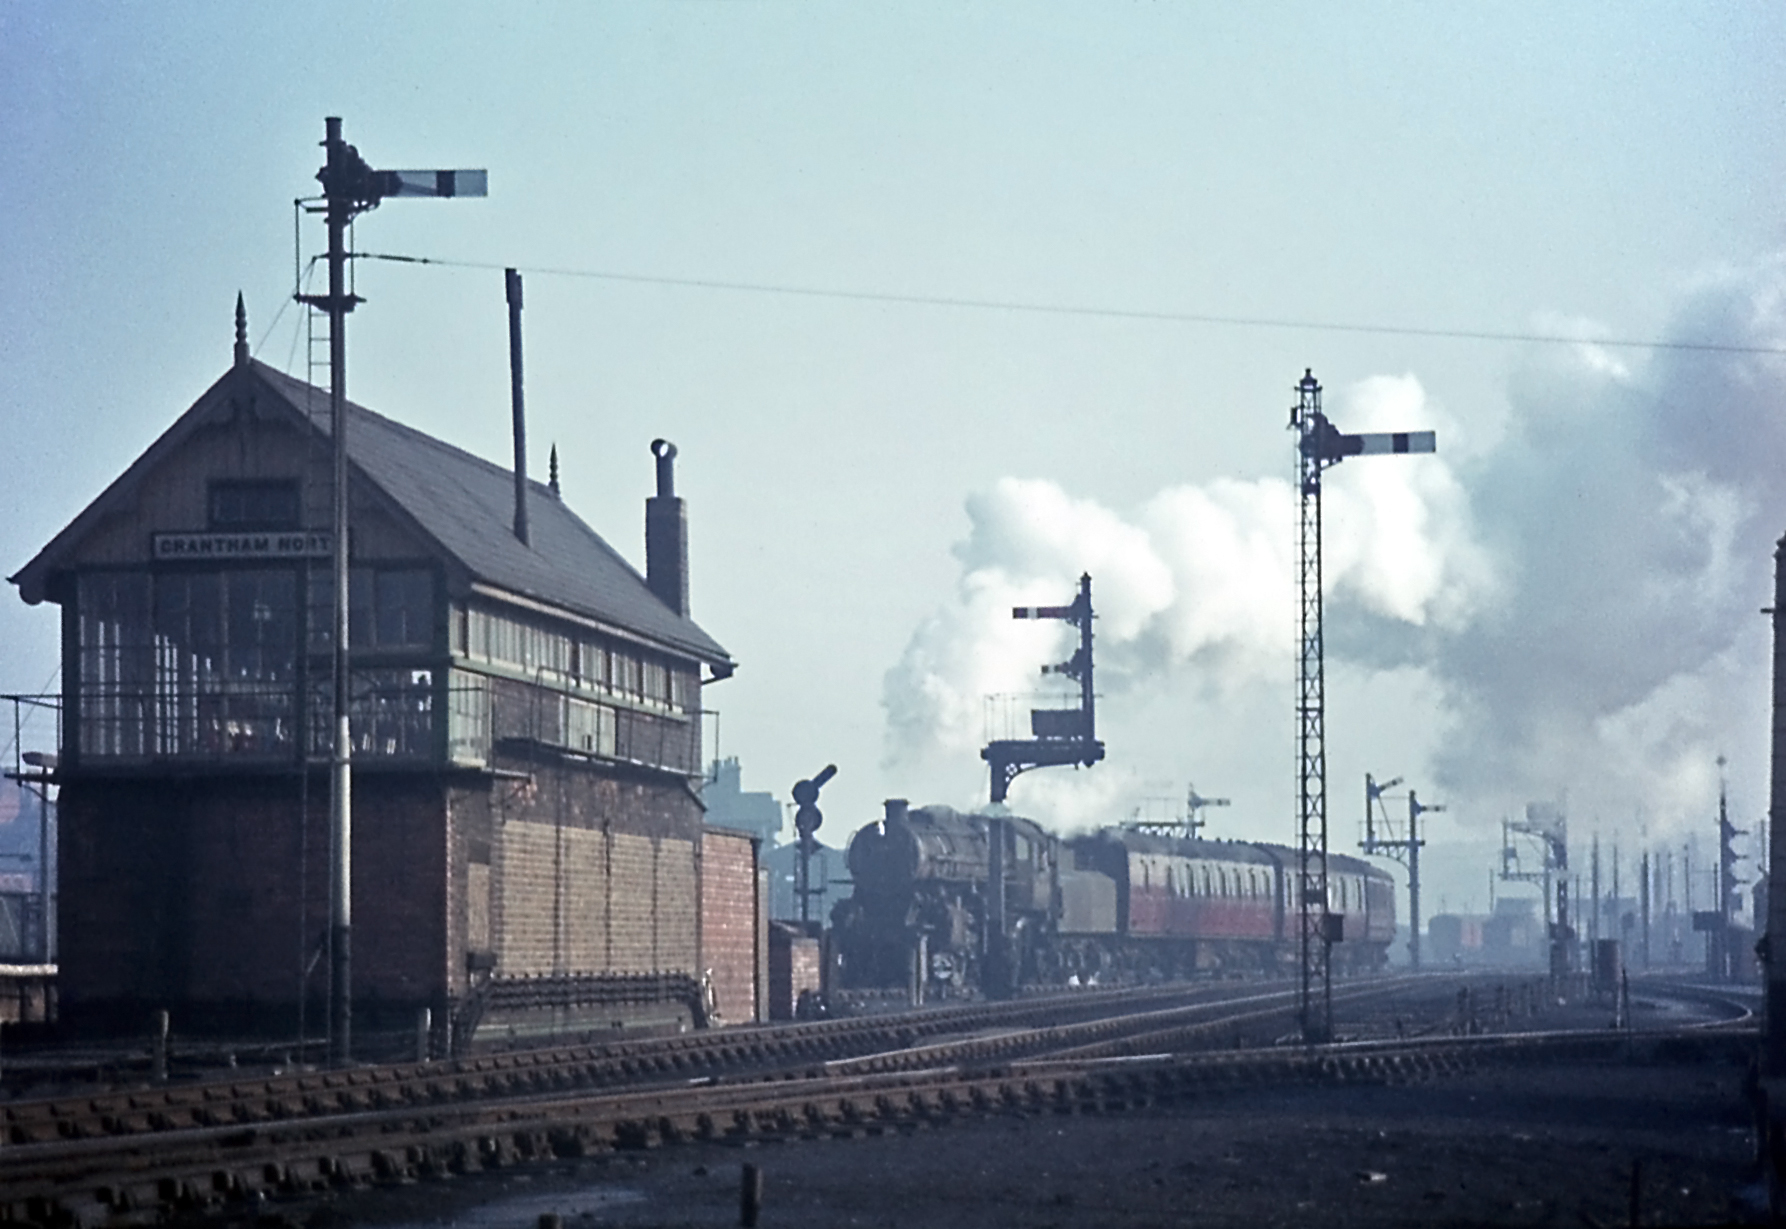 On Monday 25th February 1963 a mid-afternoon service for Lincoln, hauled by 4MT locomotive No. 43146, is departing from the Western platform, using the connection between the end of the down side platforms and Grantham North signal box to join the Down Main line. The four signals nearest the photographer in this view are, from left to right: o the signal for trains departing on the Nottingham line (nearest the signal box) o the platform starting signal for the Down Main line (a colour light signal) o the signal for trains arriving from the Nottingham line (nearest the signal box) 0 the signal for trains departing for the north on the Goods line (to the right of the Nottingham line) As evidenced by the stove pipe and the chimney, due to its length Grantham North box had the 'luxury' of two coal-fired stoves. Photograph by Noel Ingram, used with permission from Steam World.